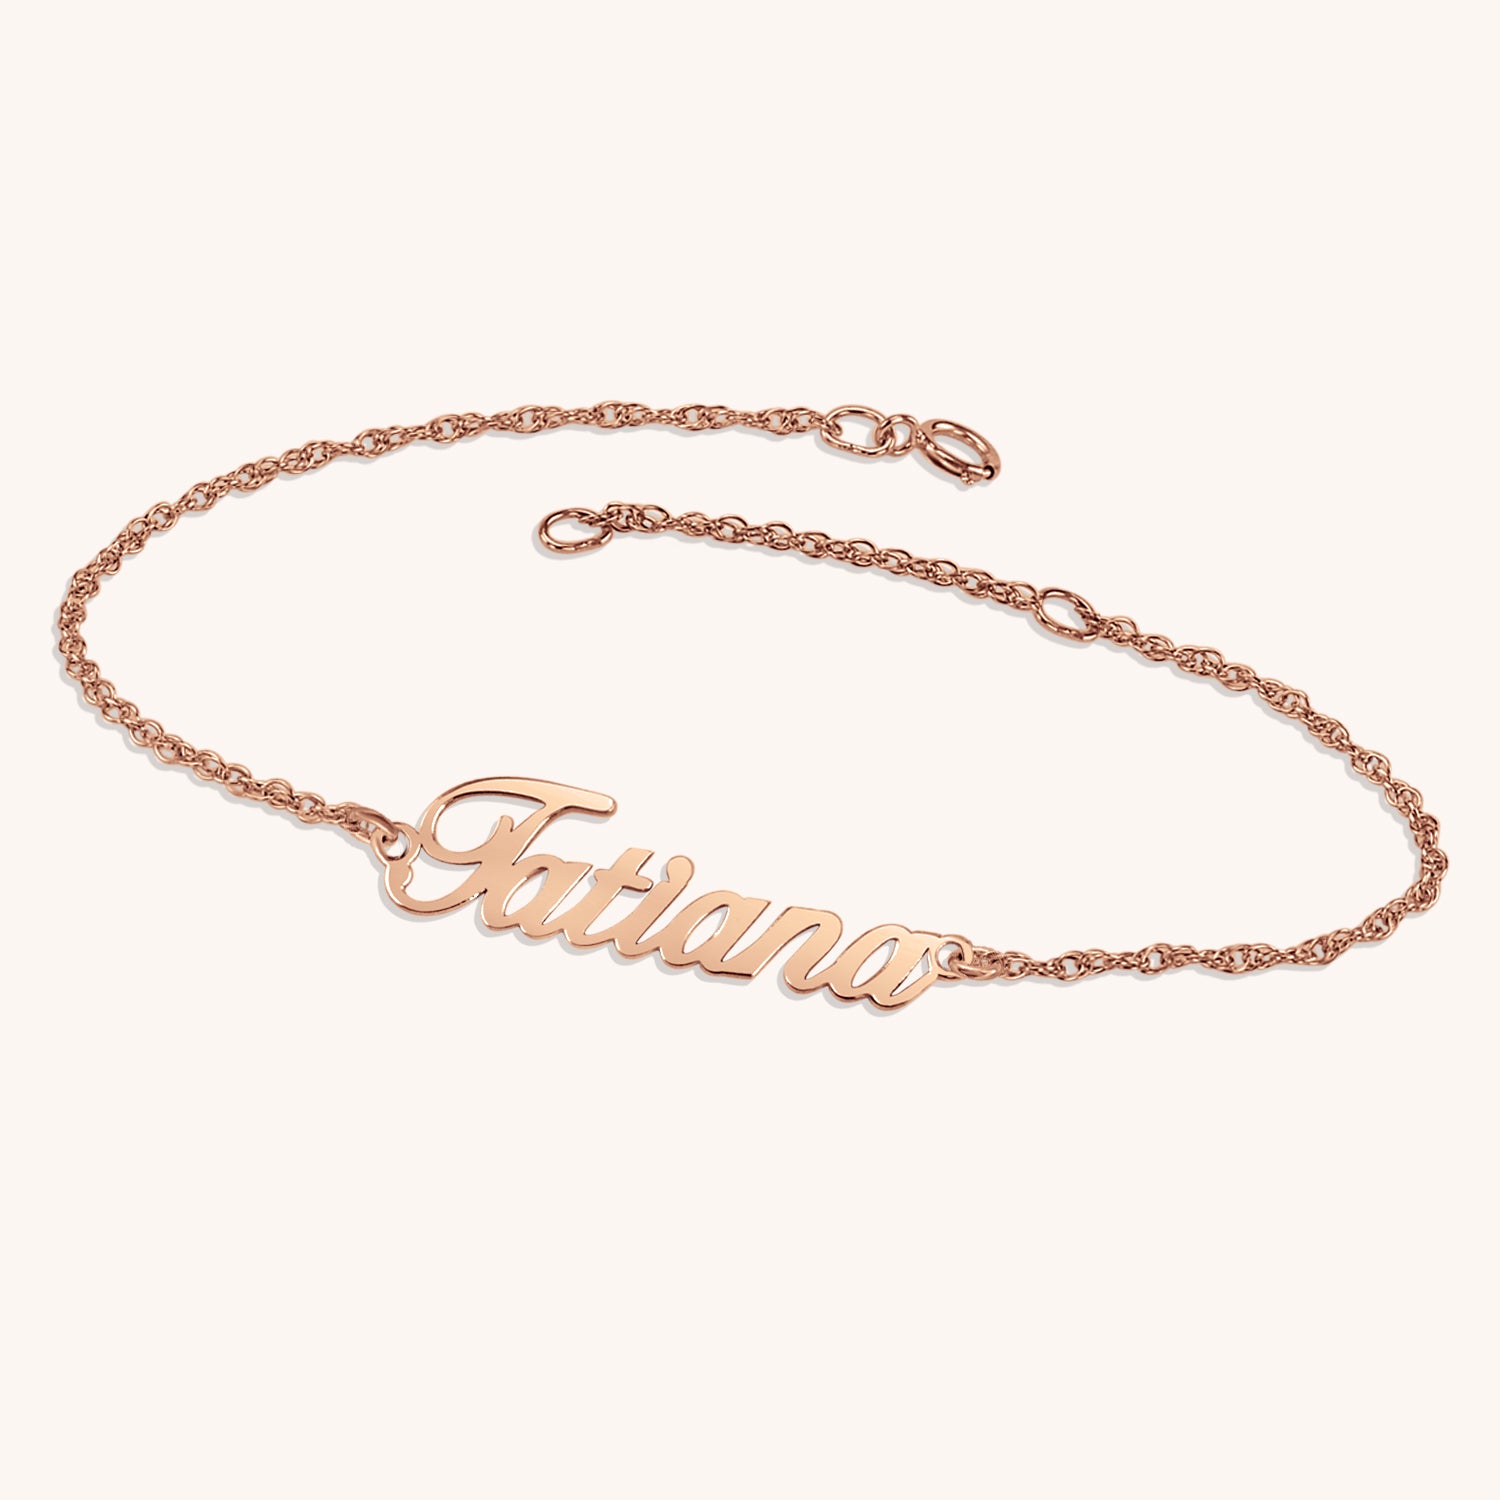 Buy Custom Name Bracelet With Link, Rolo or Curb Chain, Personalized  Bracelet for Women, Nameplate Bracelet, Dainty Name Bracelet Online in  India - Etsy